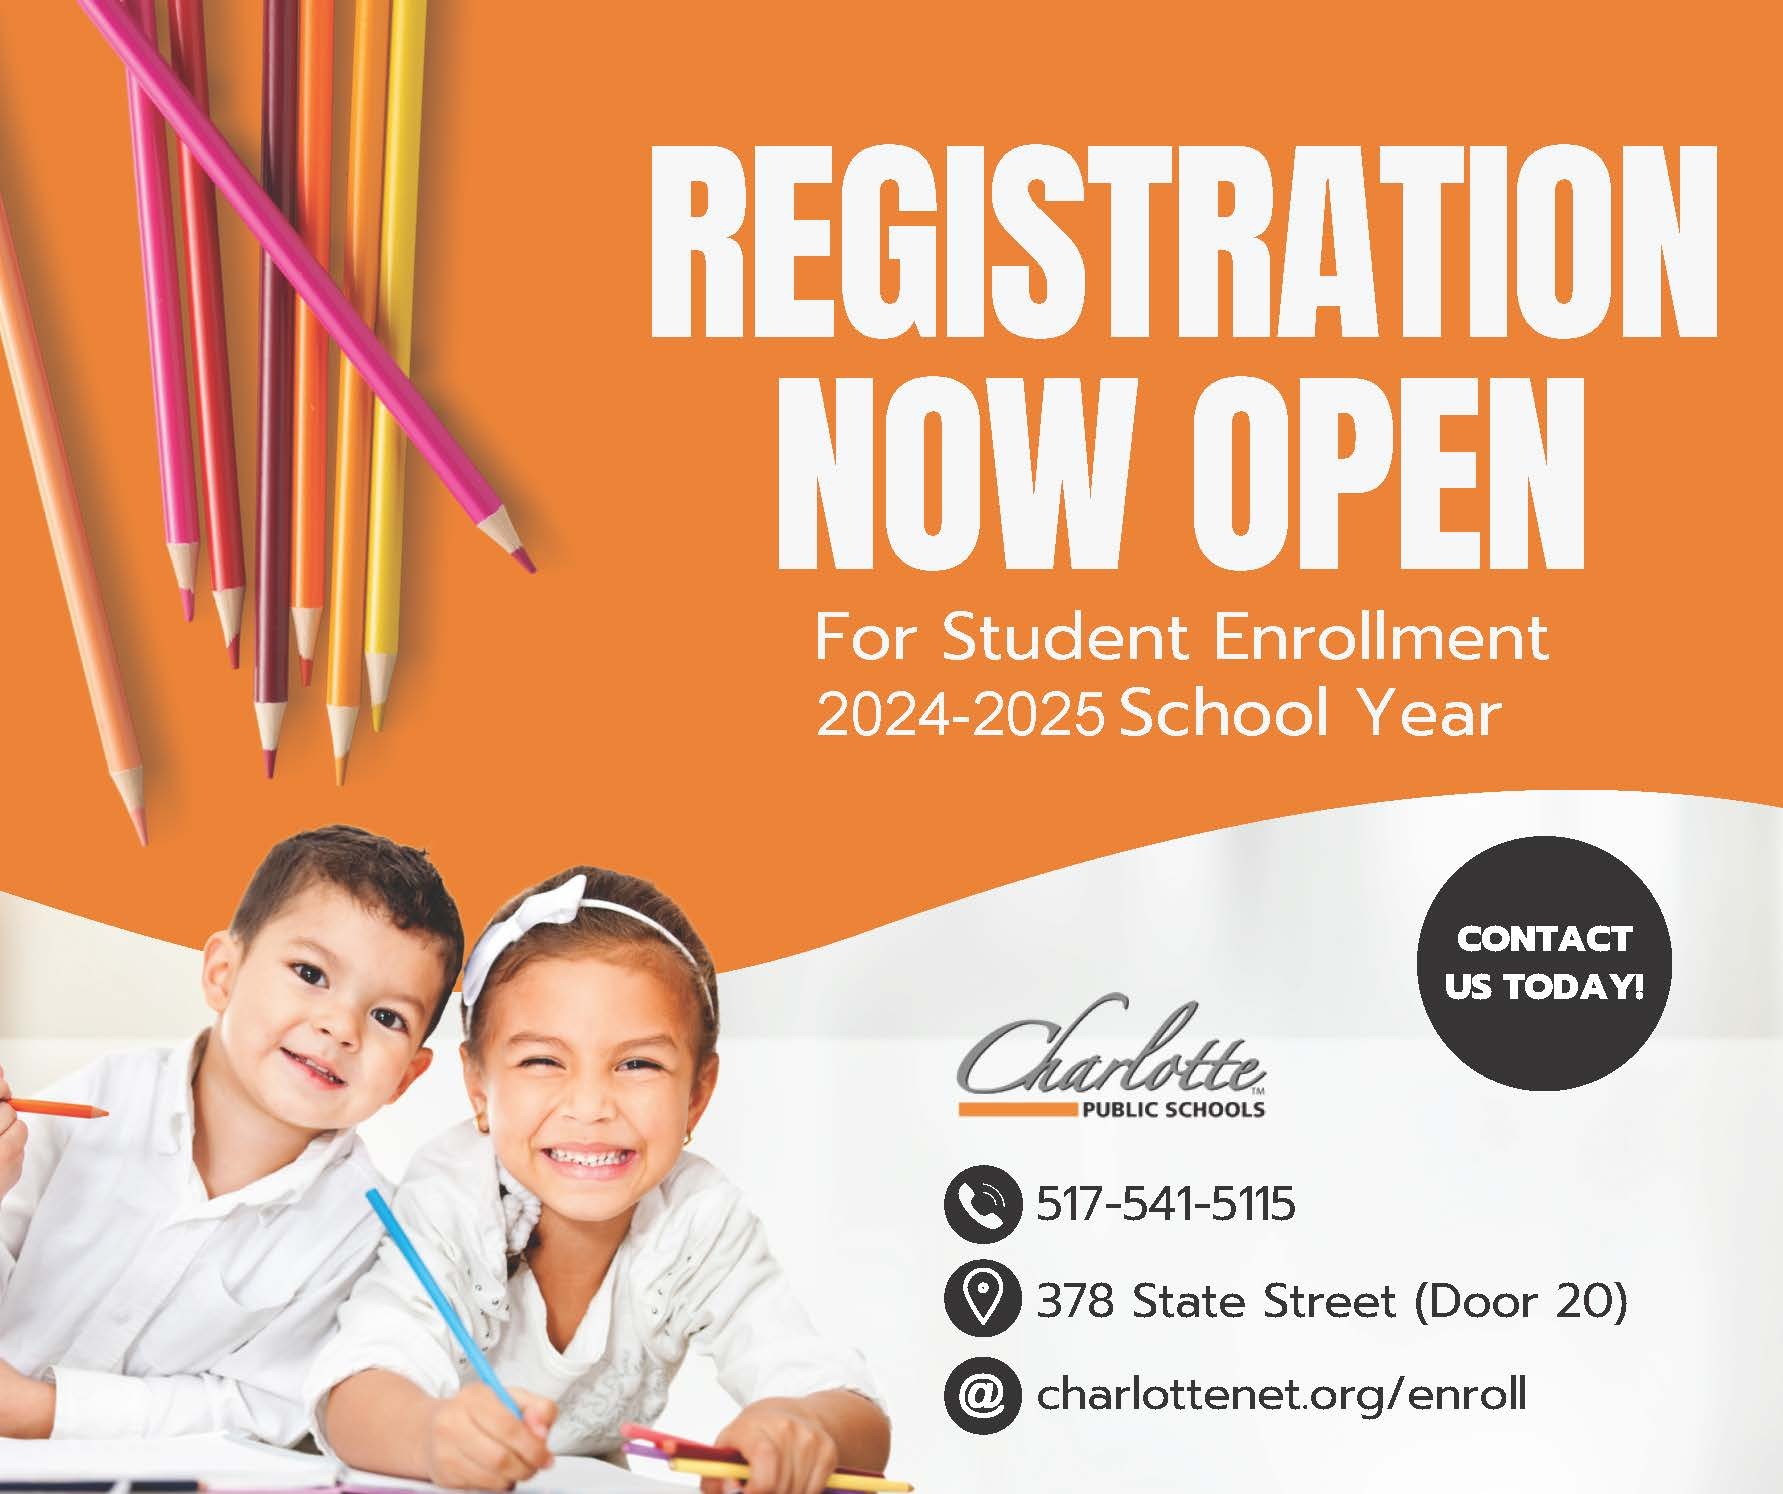 Registration now open for student enrollment 2024-2025 School Year